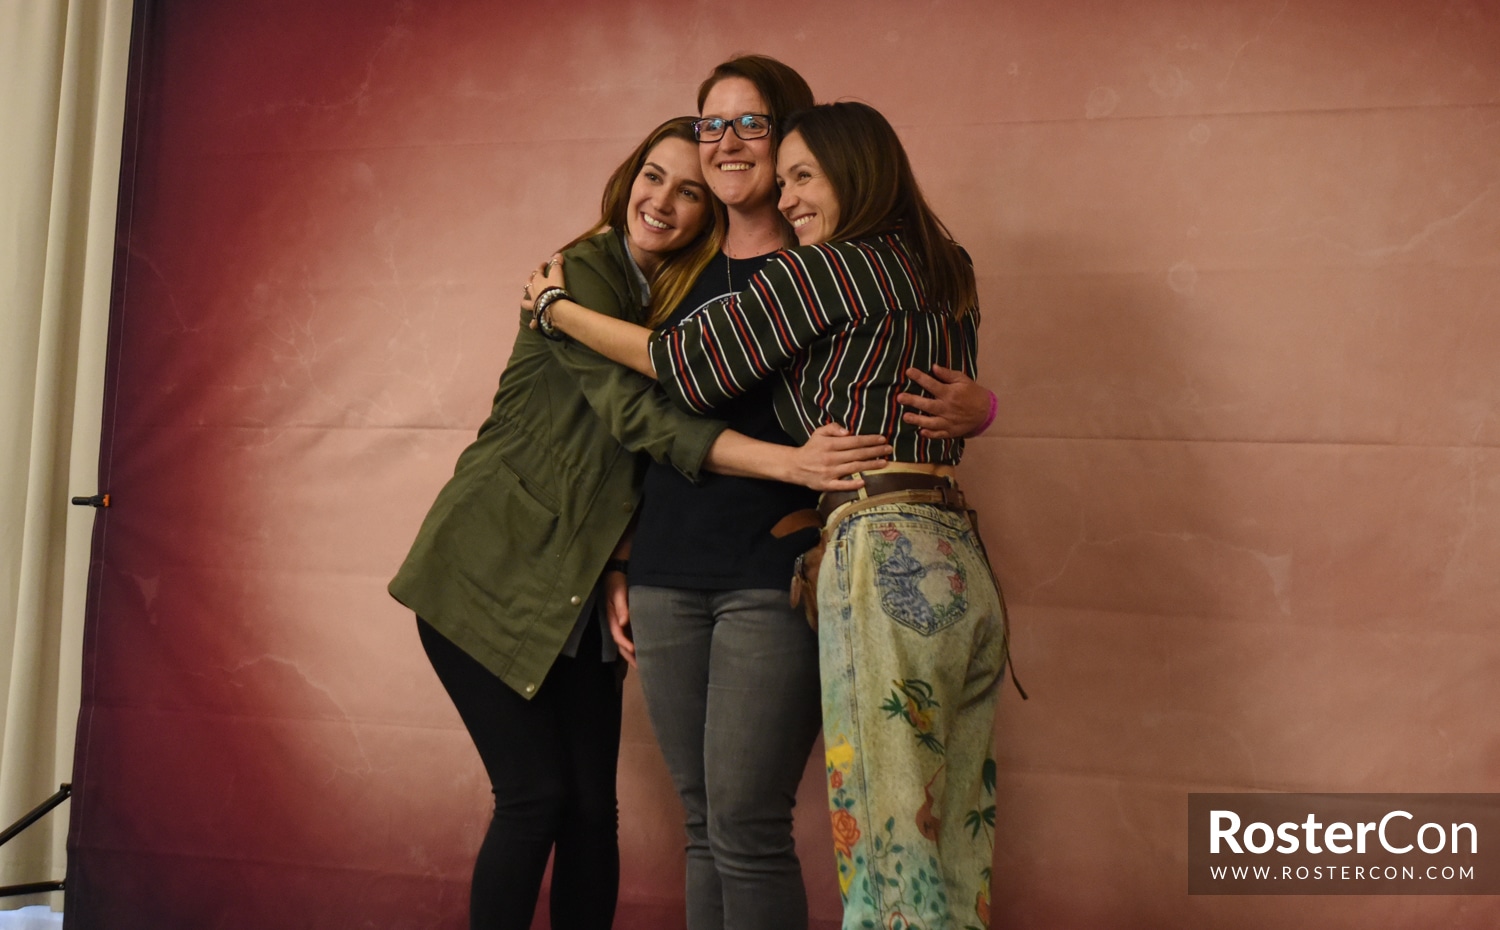 Katherine Barrell & Dominique Provost-Chalkley - Our Stripes Are Beautiful - Wynonna Earp